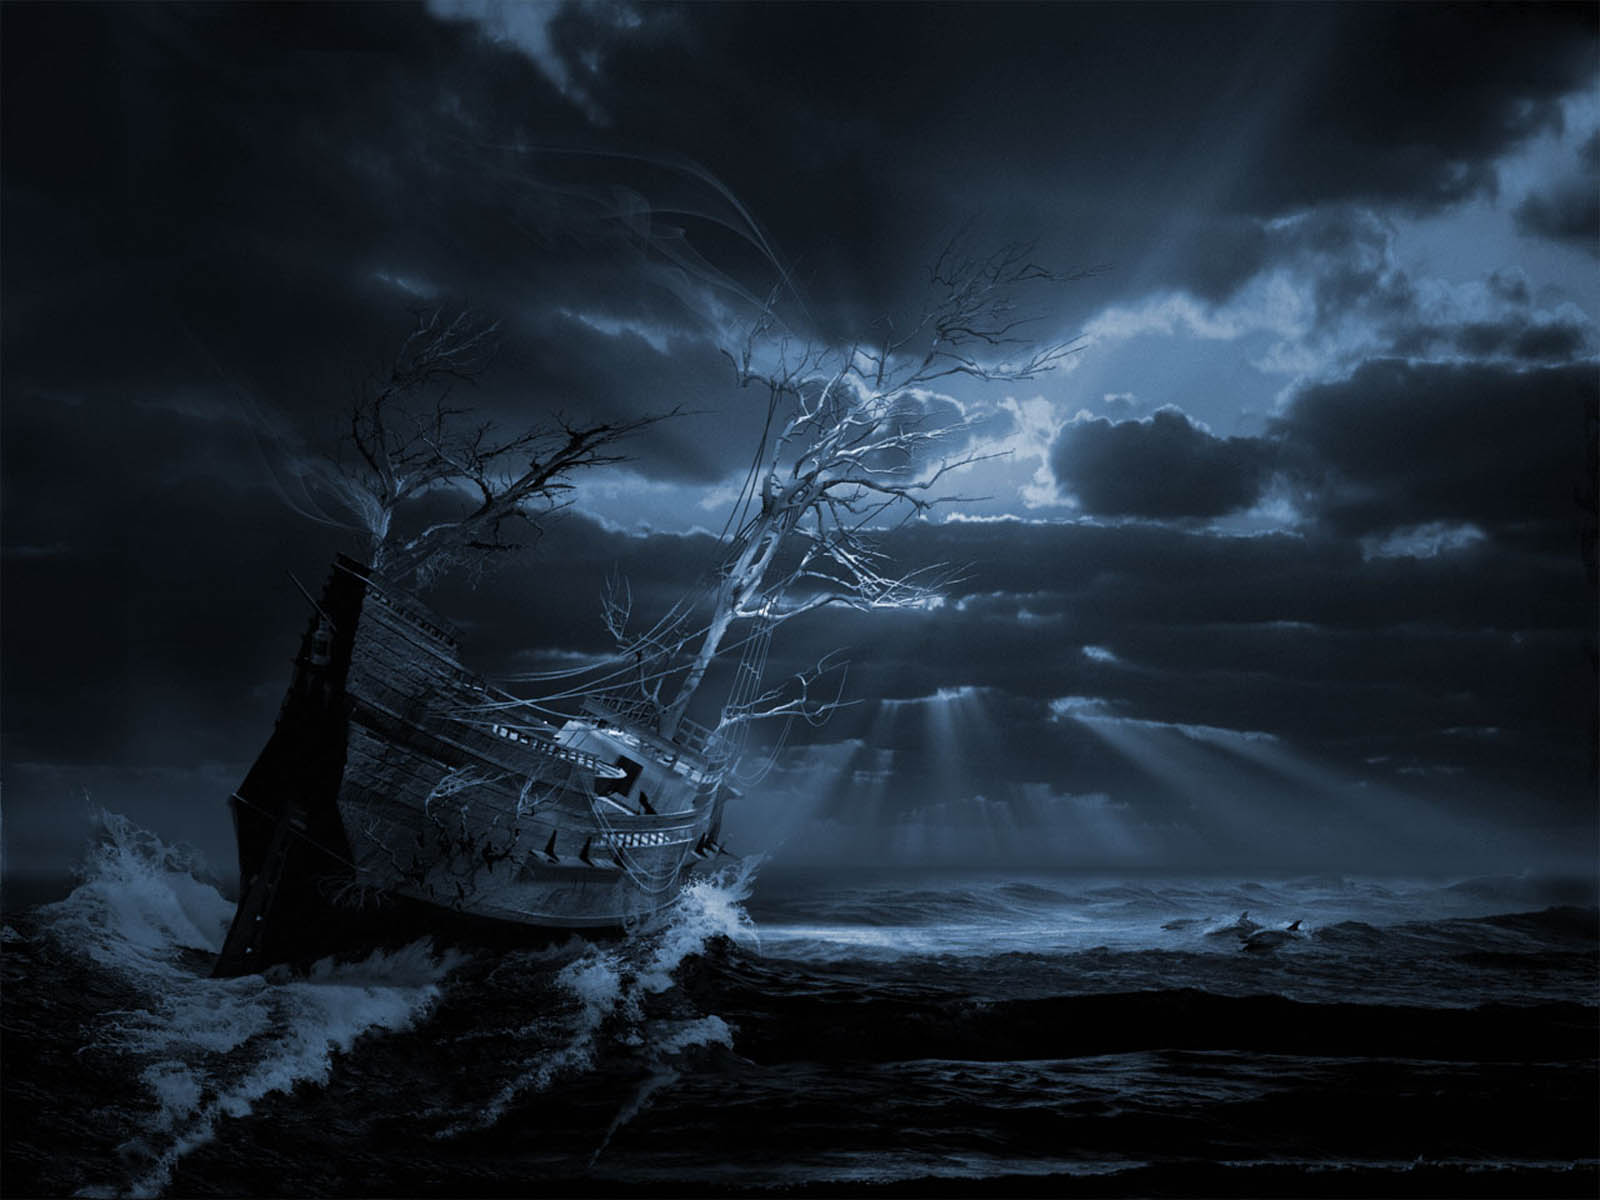 old ship wallpaper,sky,nature,darkness,thunderstorm,water